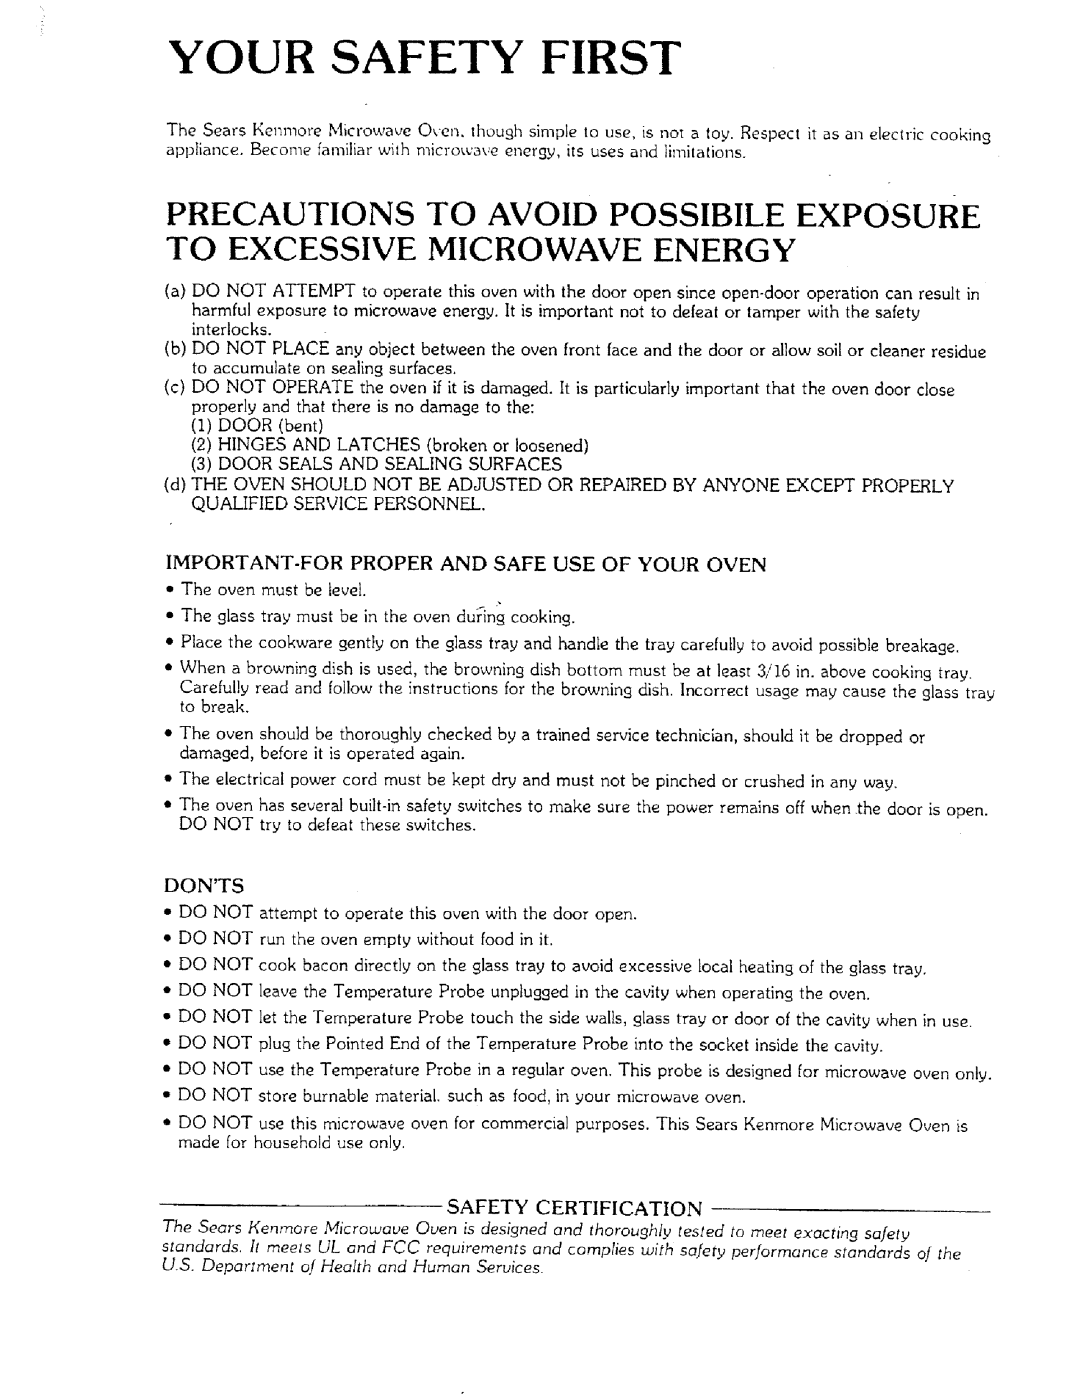 Sears 85951 manual Your Safety First, Precautions To Avoid Possibile Exposure, To Excessive Microwave Energy 